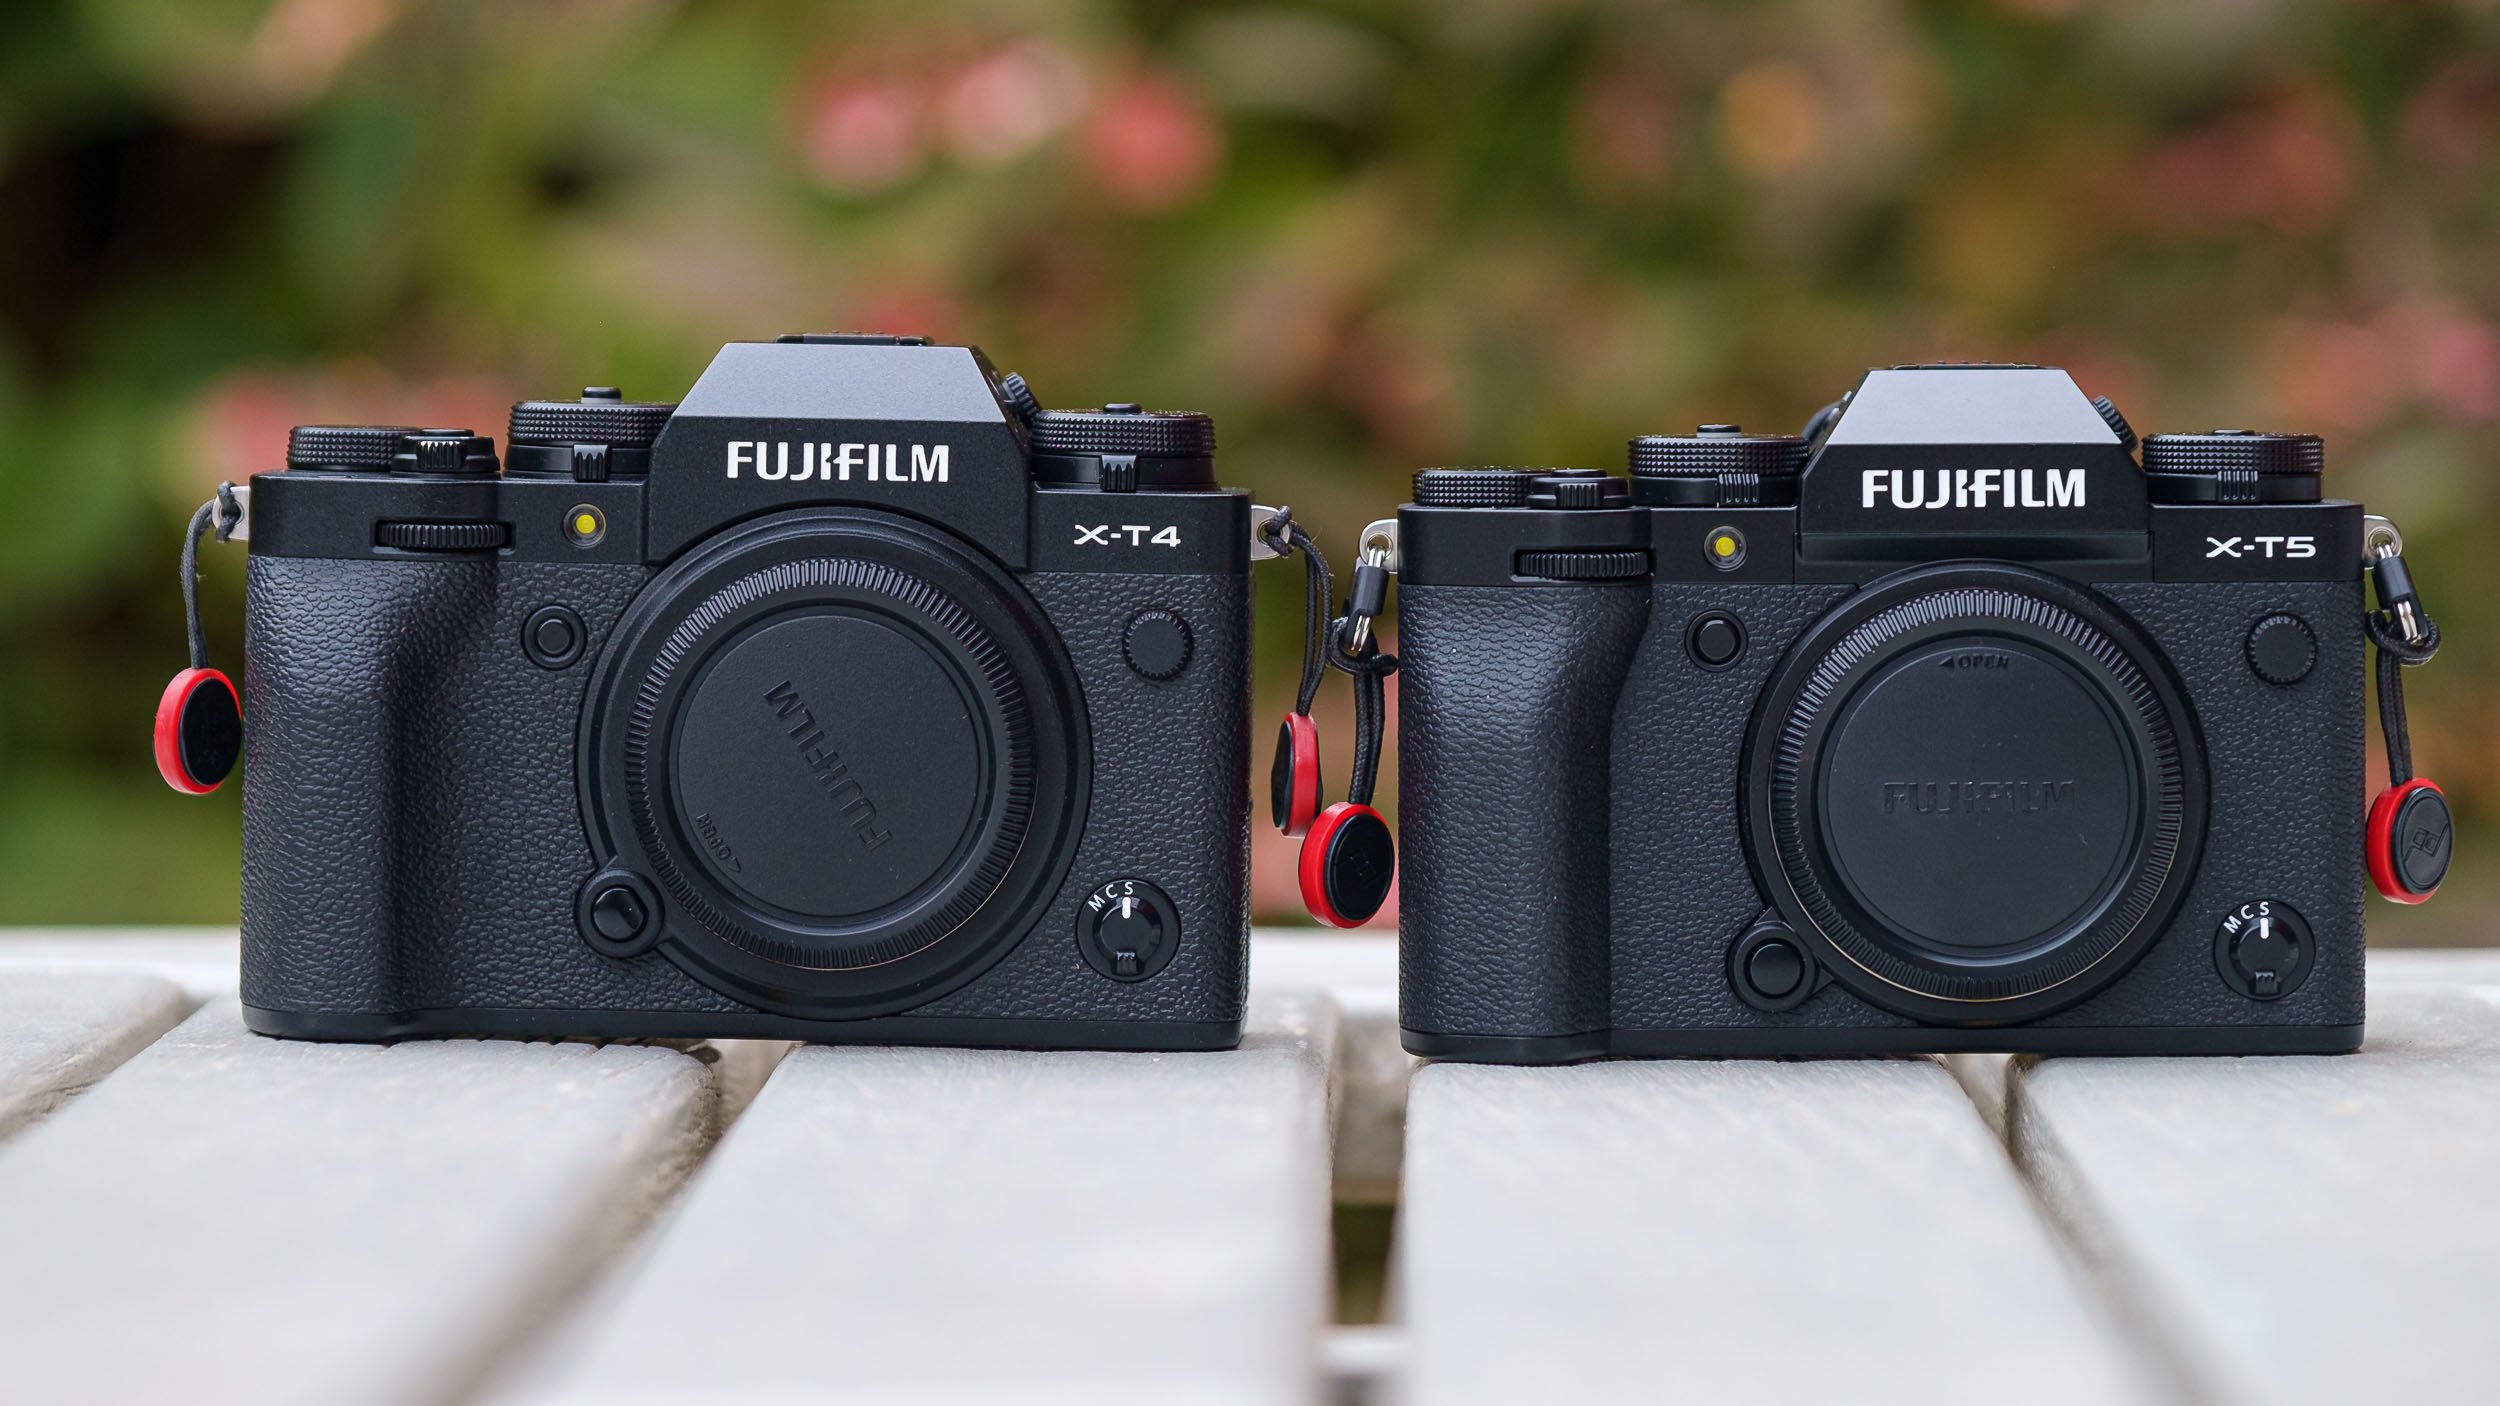 FUJIFILM XT5 A leap for the XT — Upton Photography